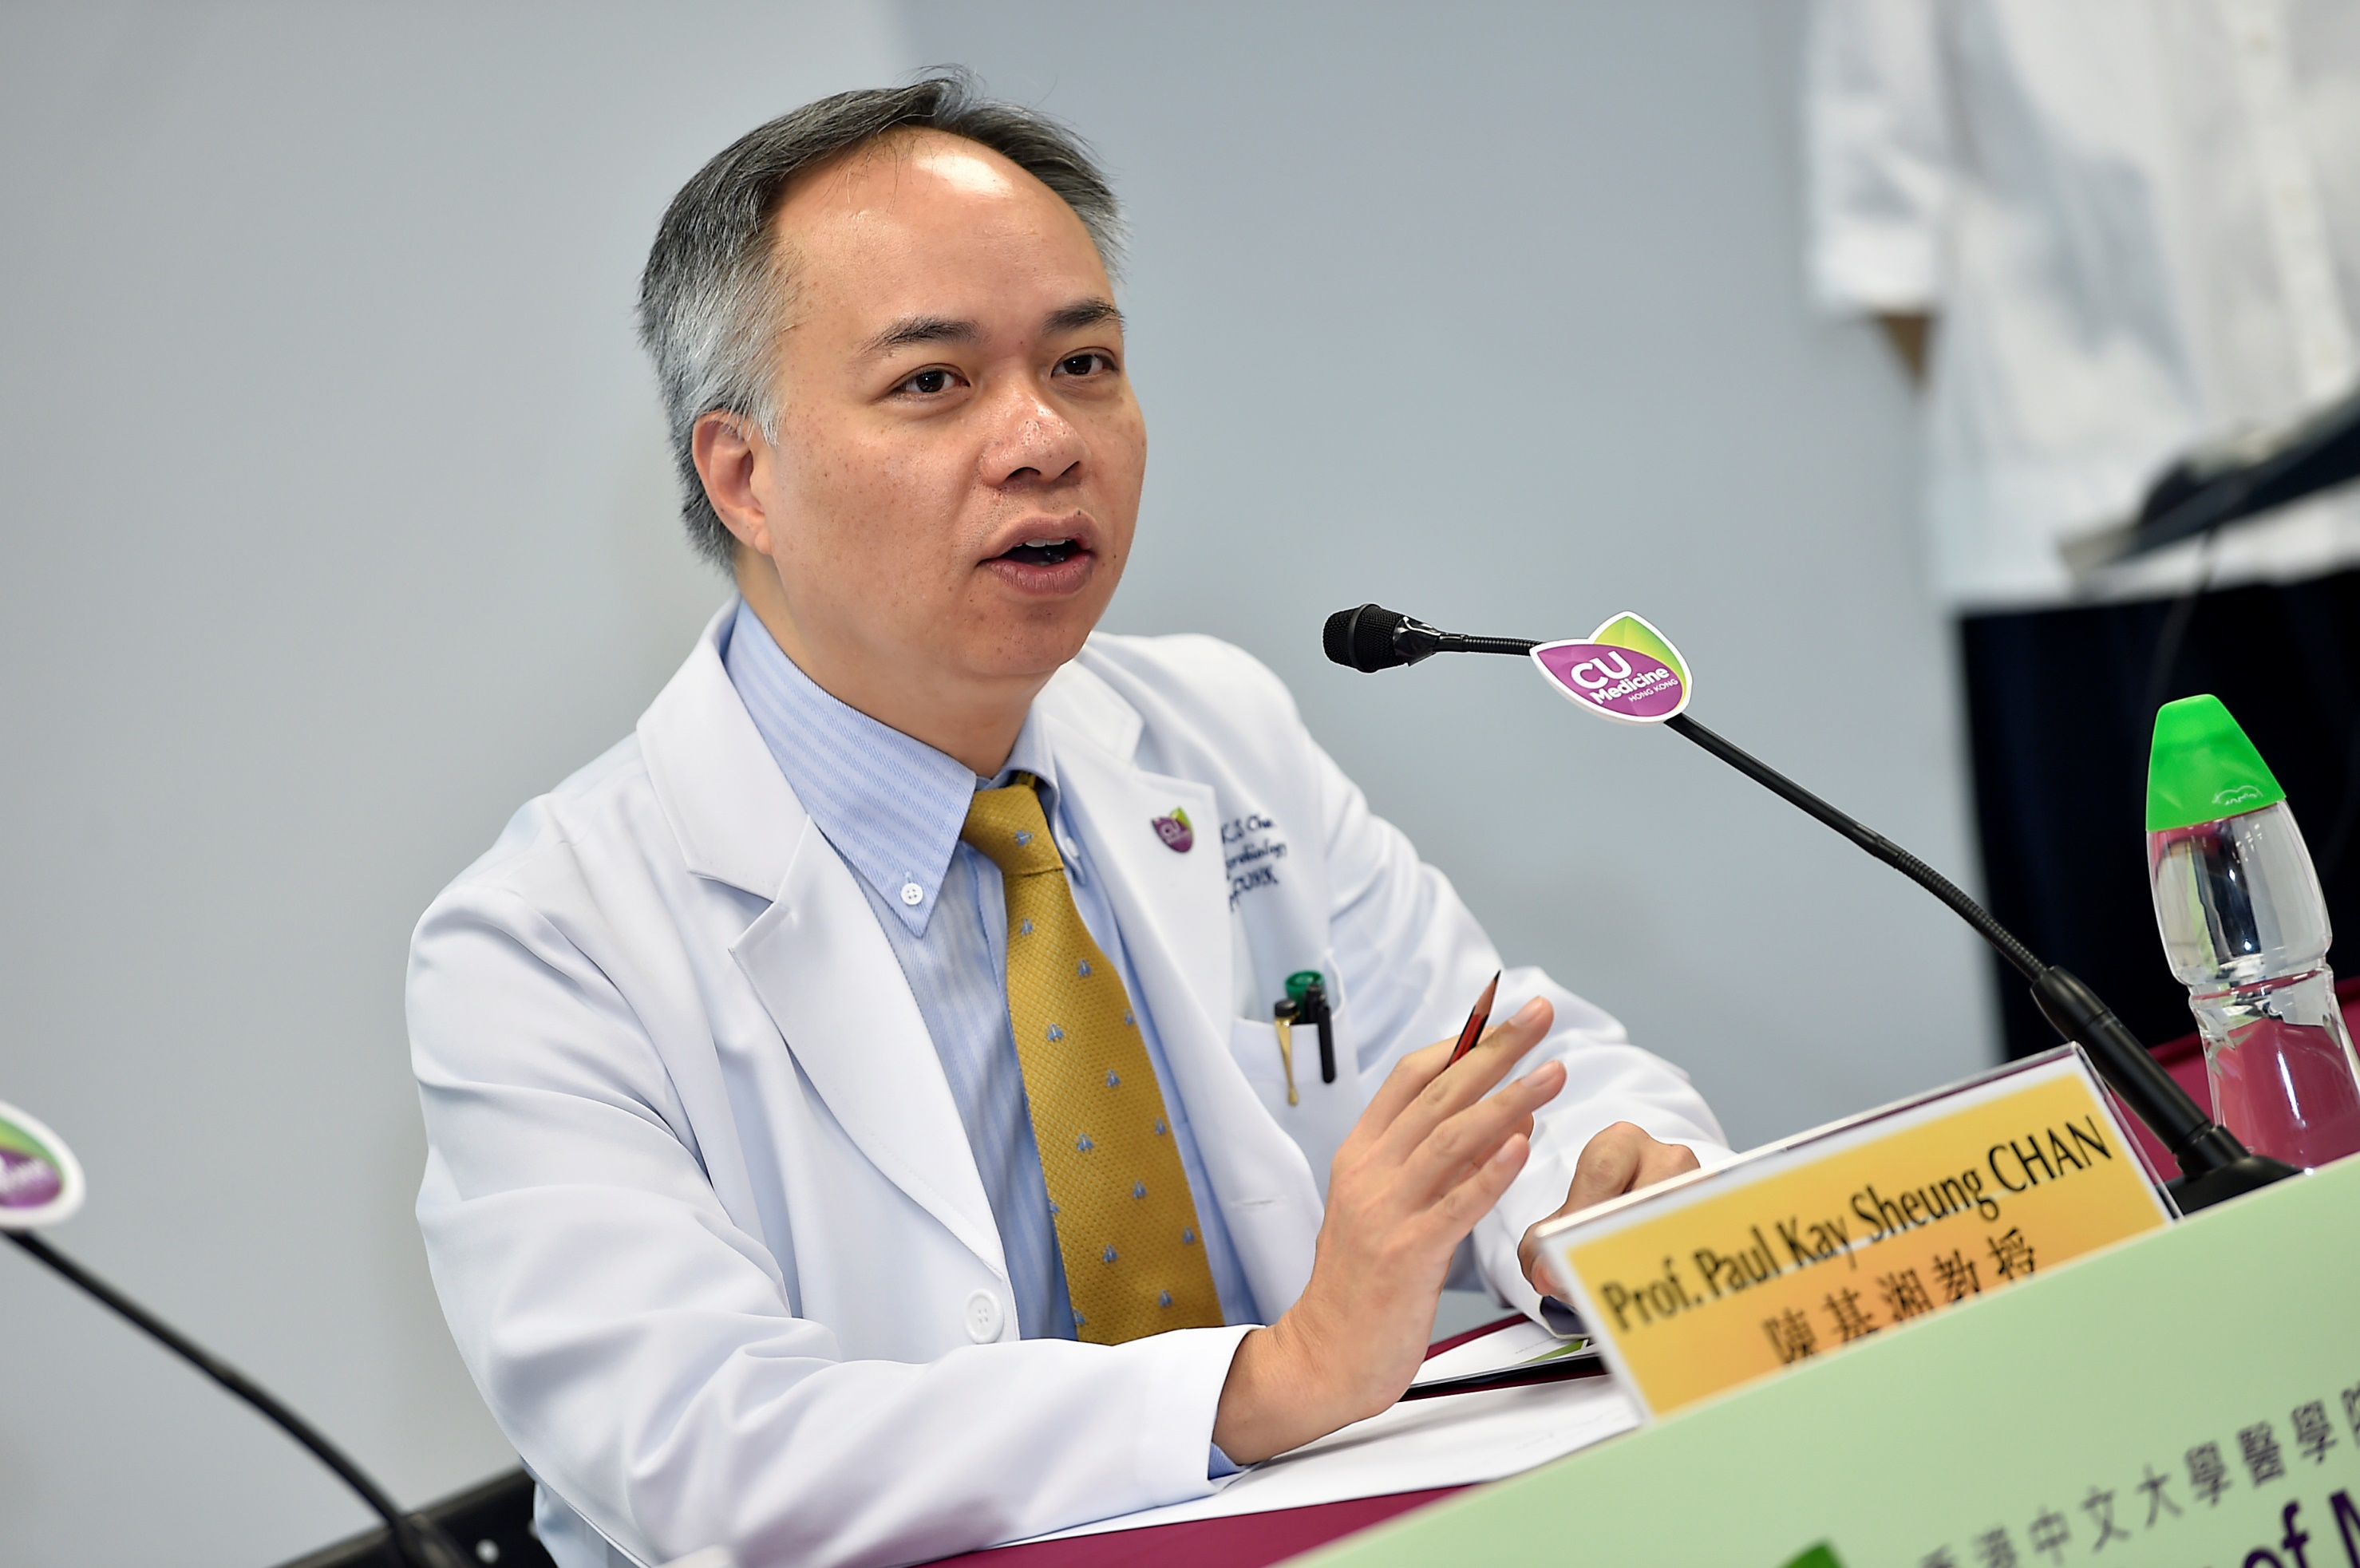 Professor Paul CHAN emphasizes that the health requirements on stool donors are stricter than those for blood or organ donors.